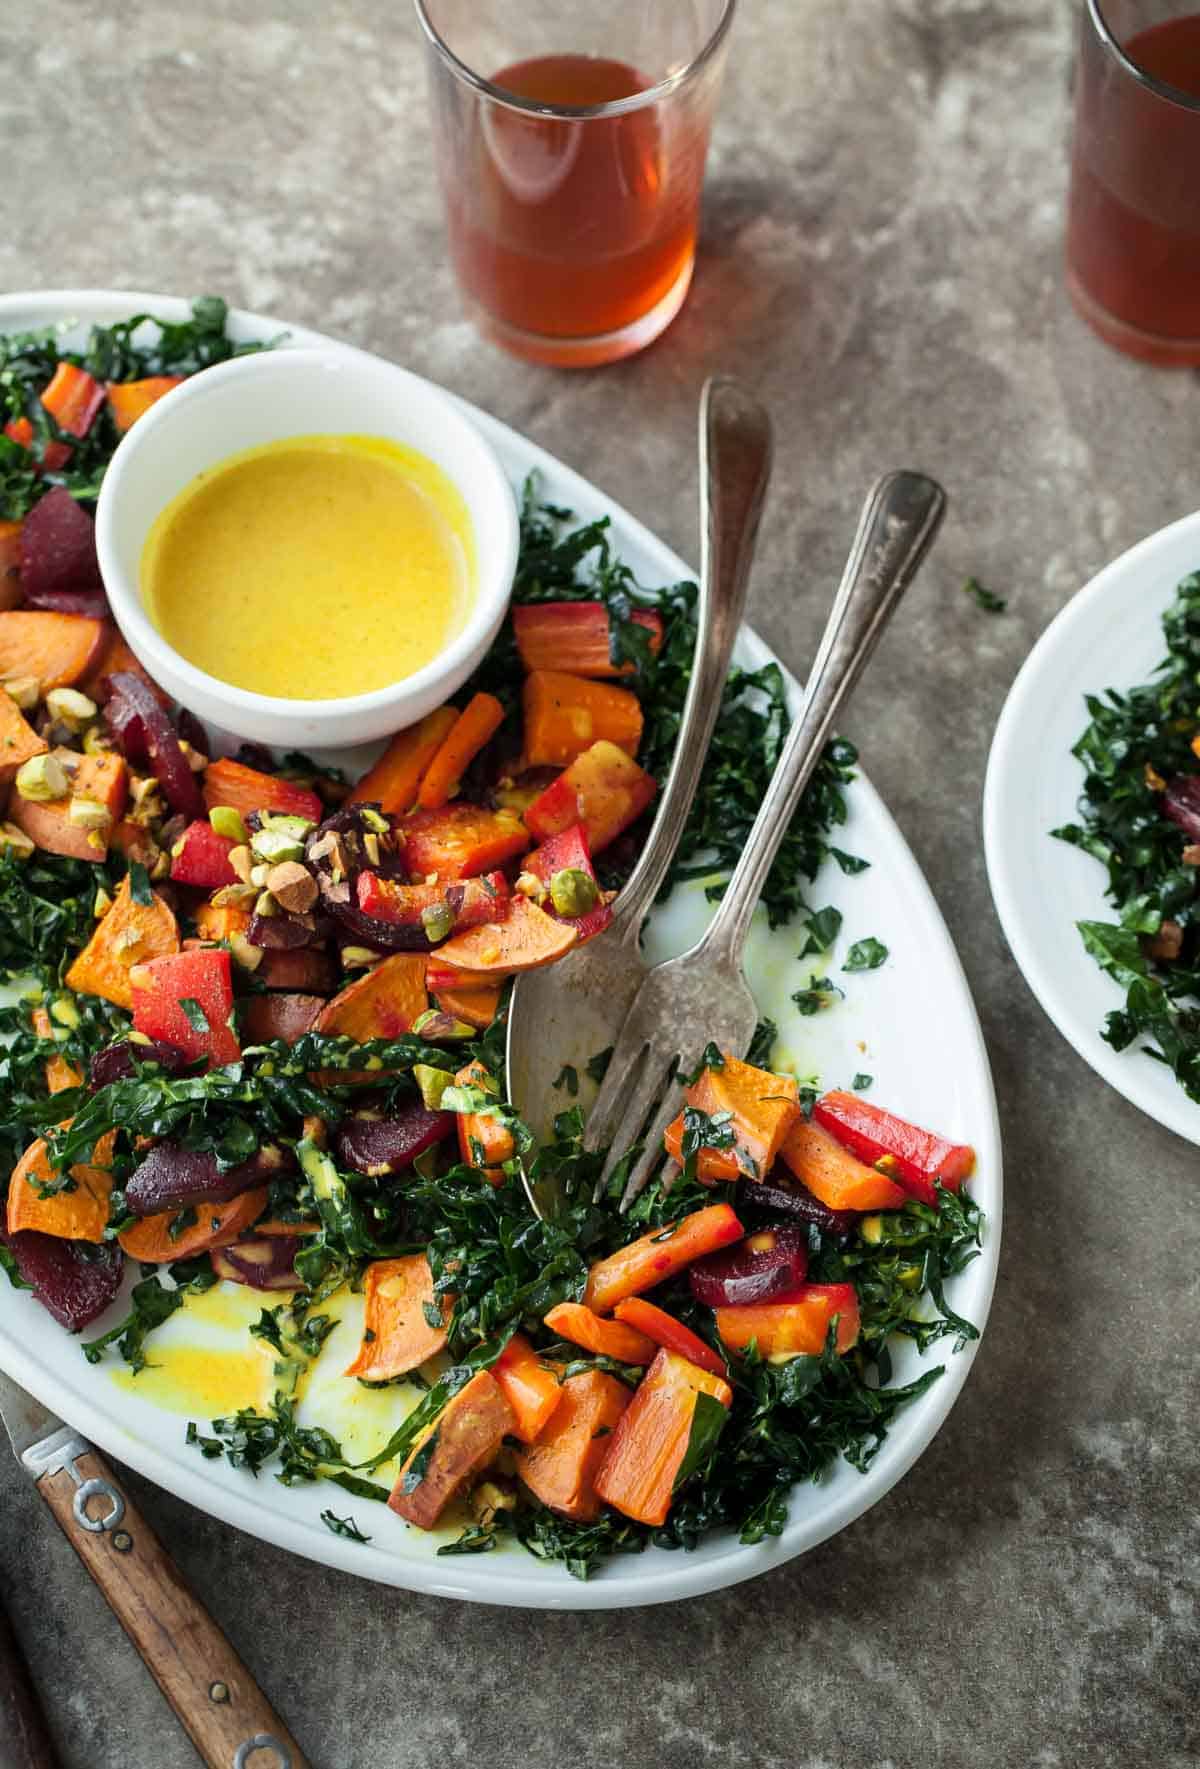 Roasted Root Vegetable and Kale Salad with Creamy Turmeric Dressing on Serving Plate with Spoon and Fork